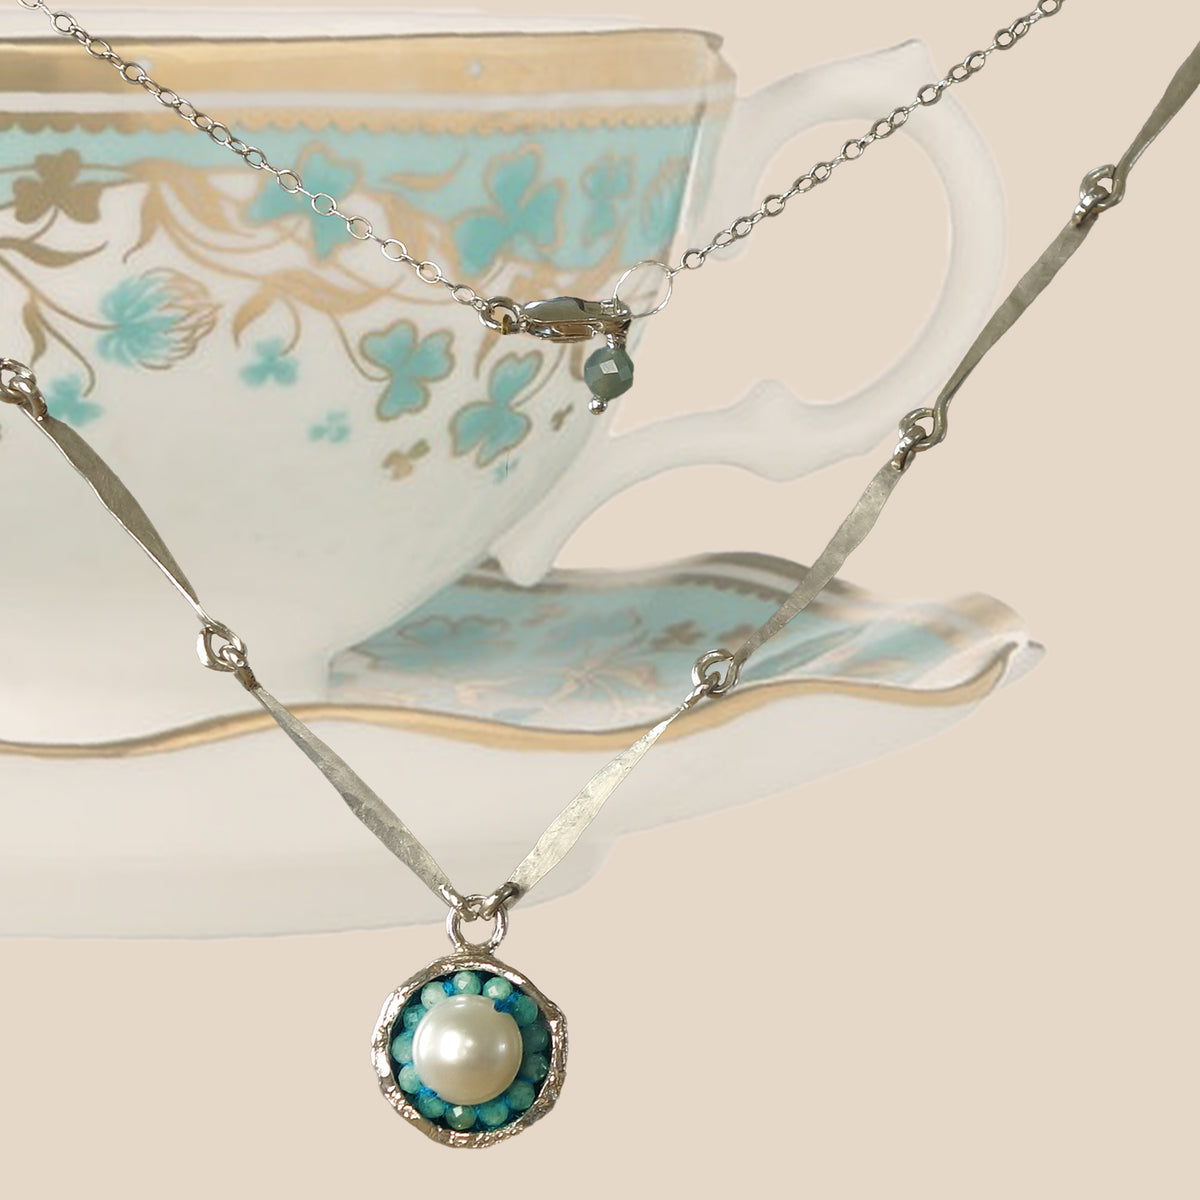 Aquamarine and Pearl cup mosaic necklace